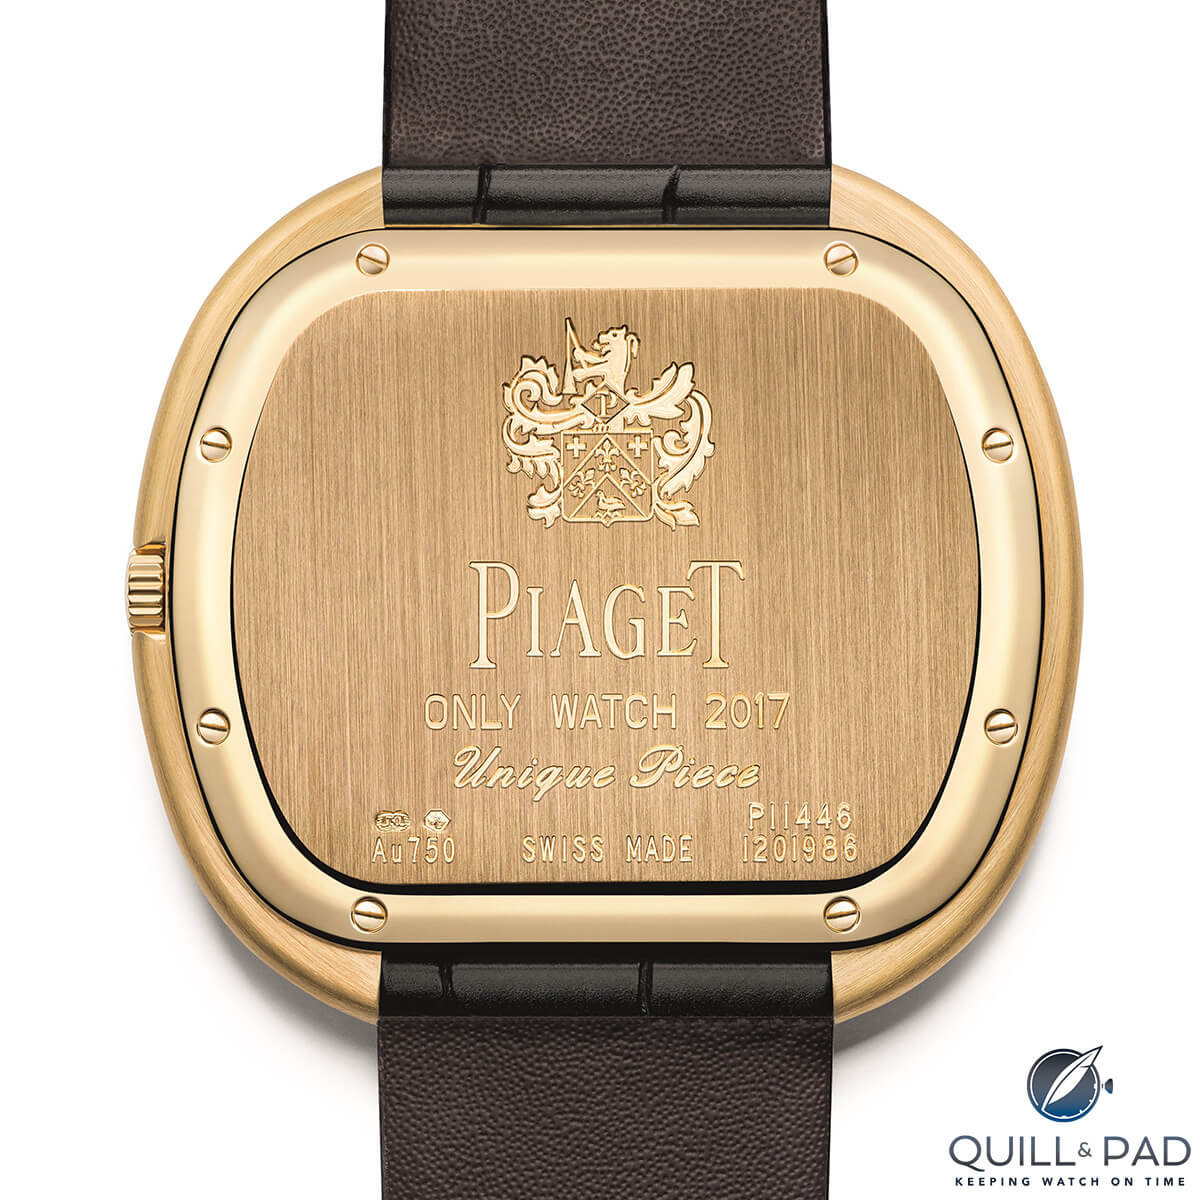 Engraved back of the Piaget Black Tie Vintage Watch For OW17